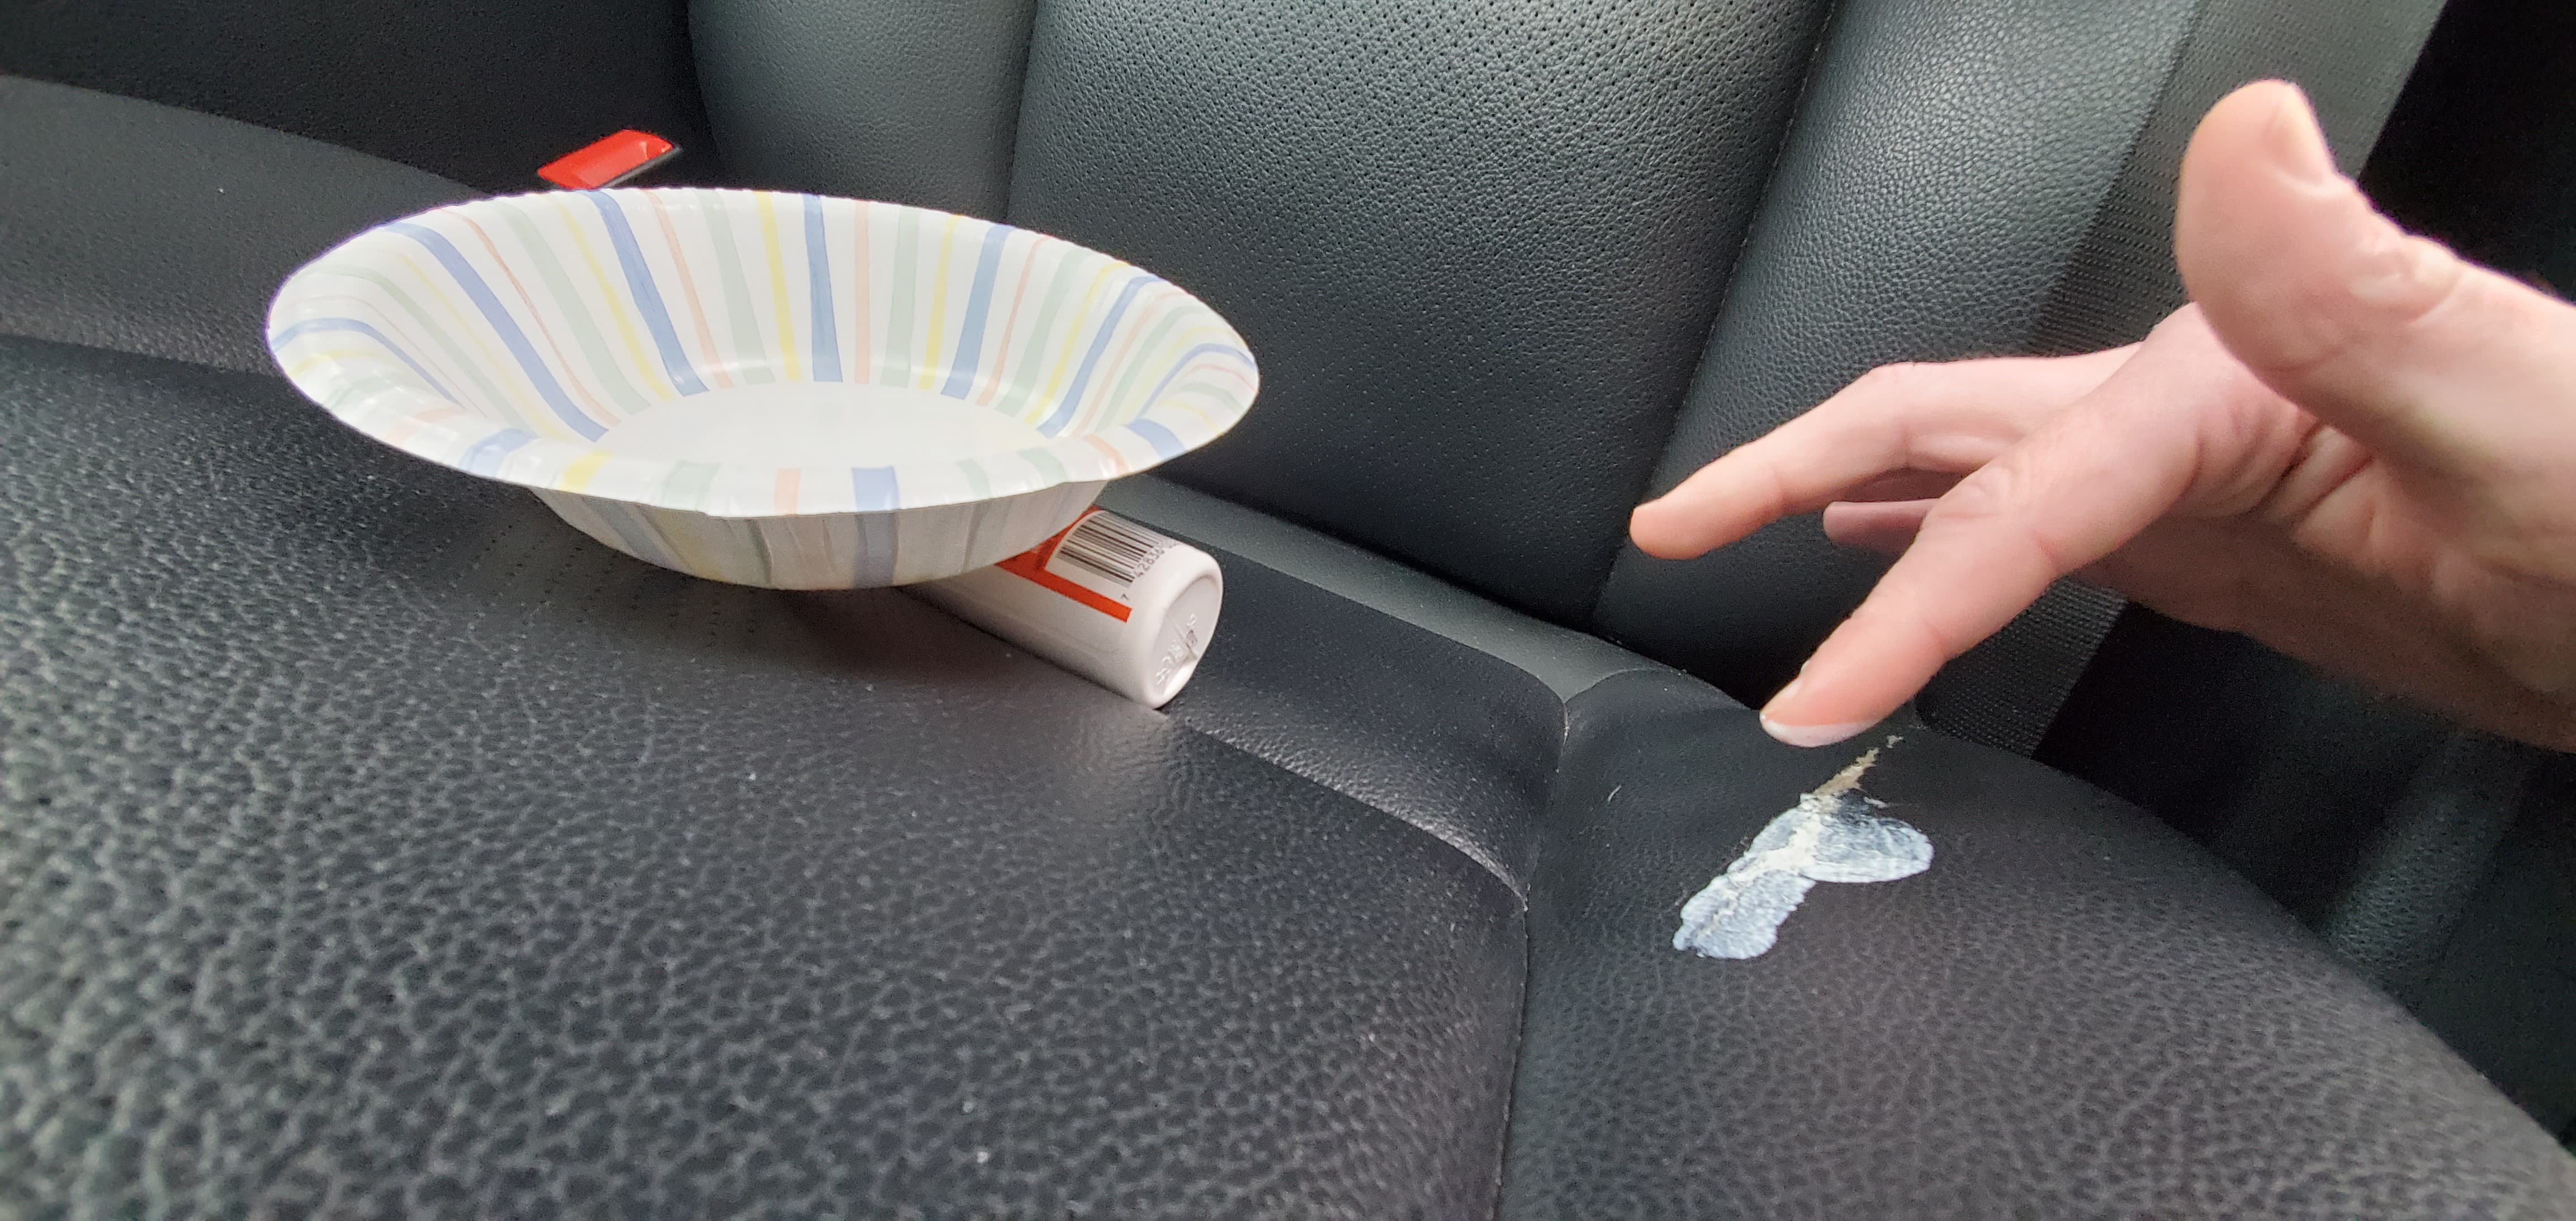 How To Repair A Leather Car Seat - How To Repair Hole In Vinyl Car Seat